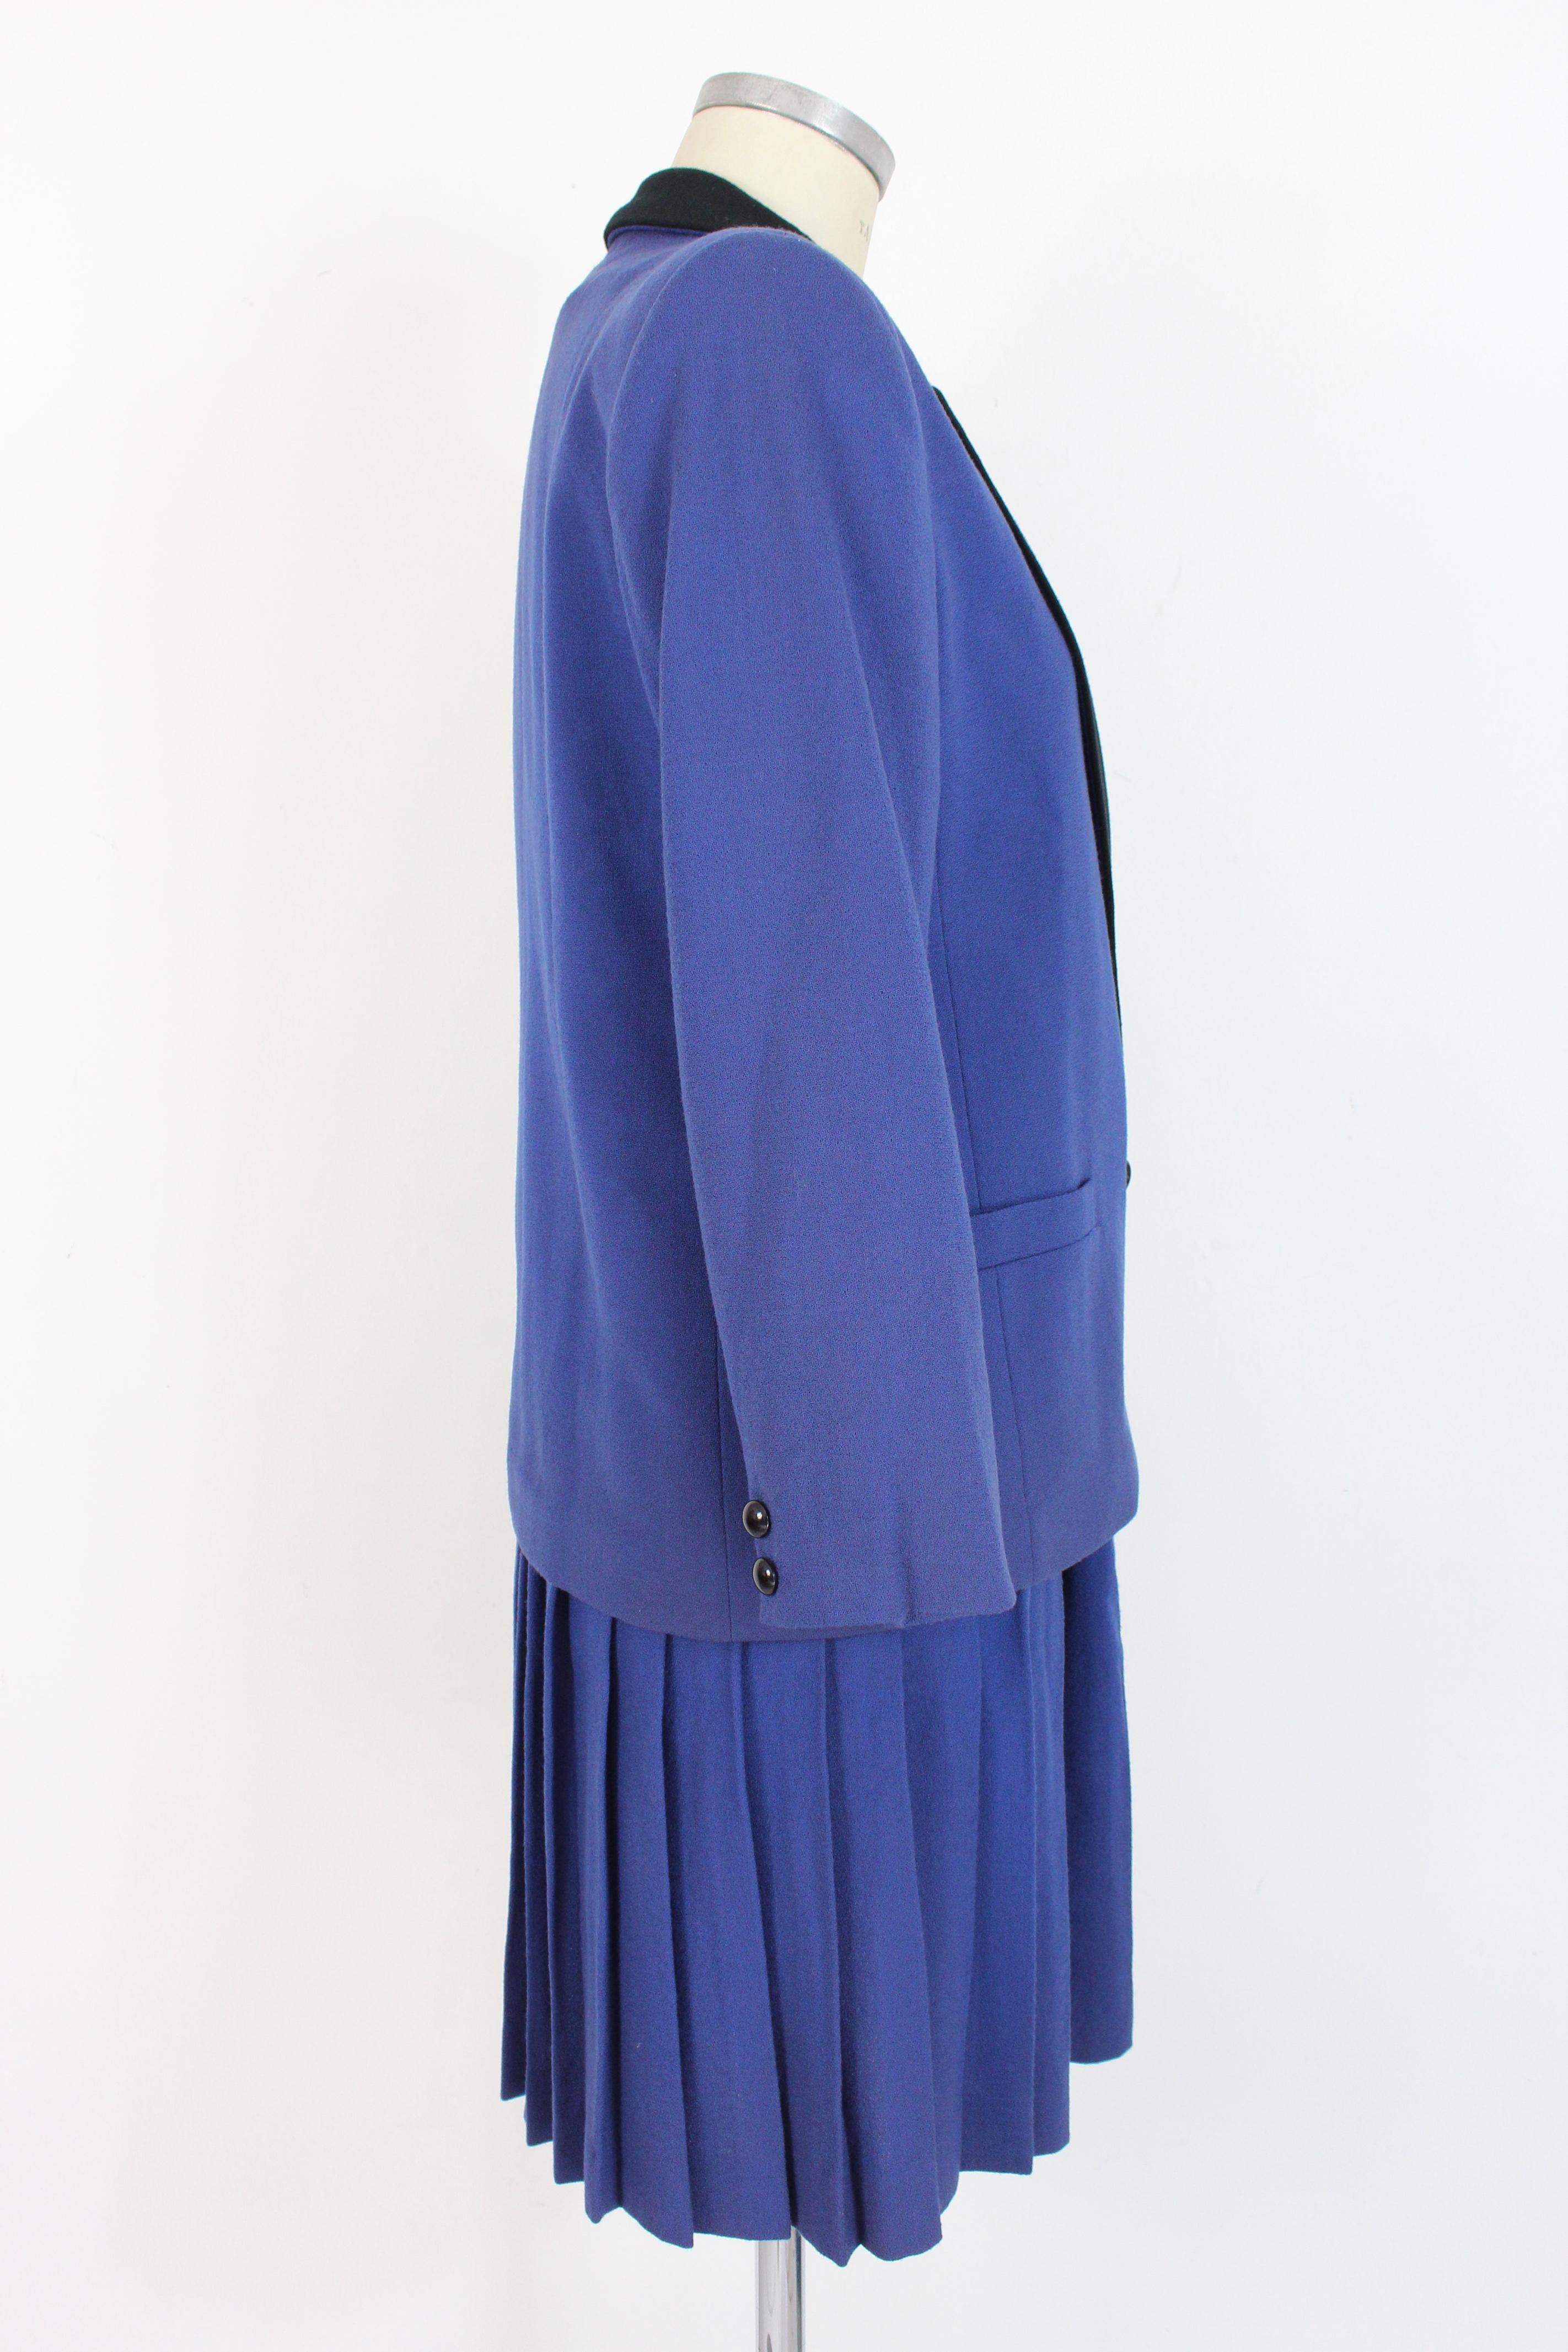 Oleg Cassini Blue Black Wool Pleated Evening Suit Skirt In Good Condition In Brindisi, Bt